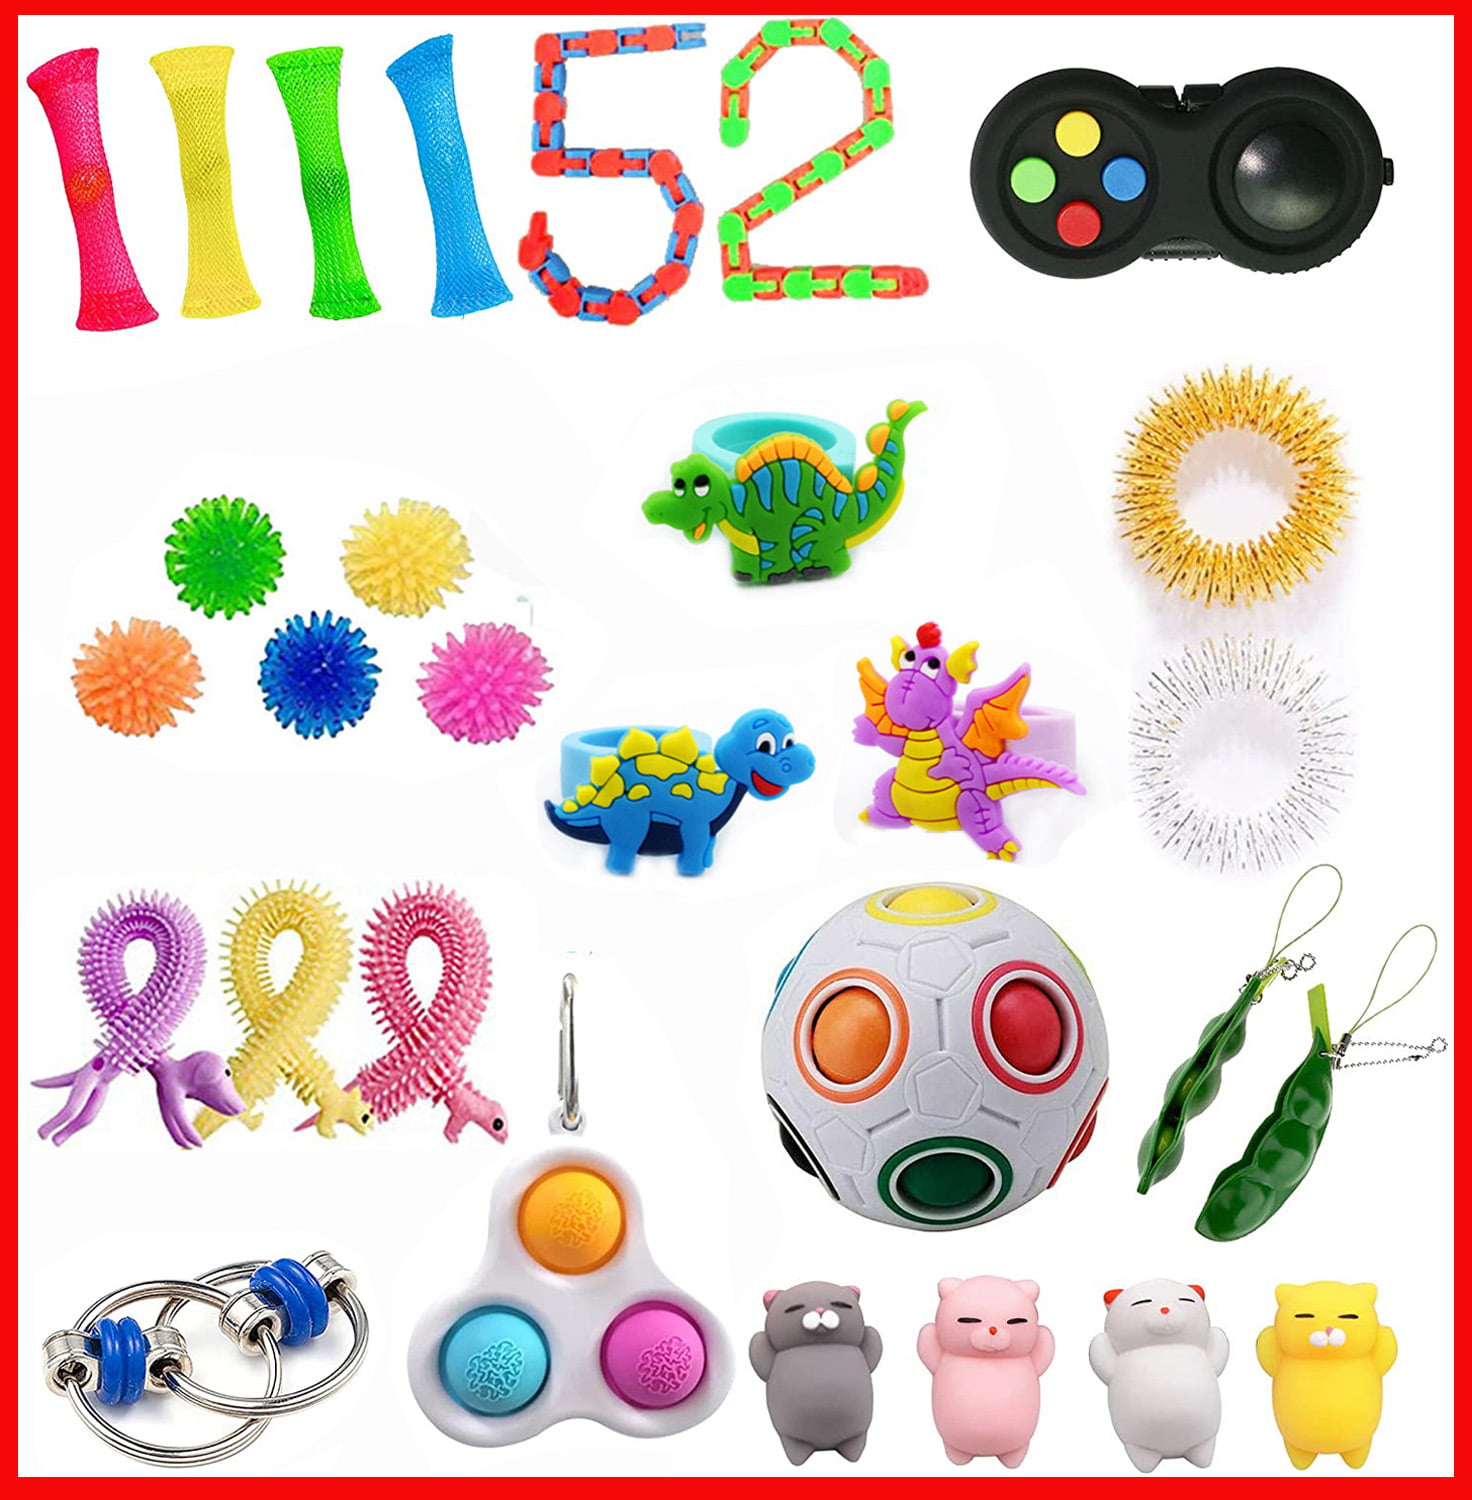 Details about   Fun Sensory Stress Reliever Ball Toy Autism Squeeze Fidget Anxietys Special gift 